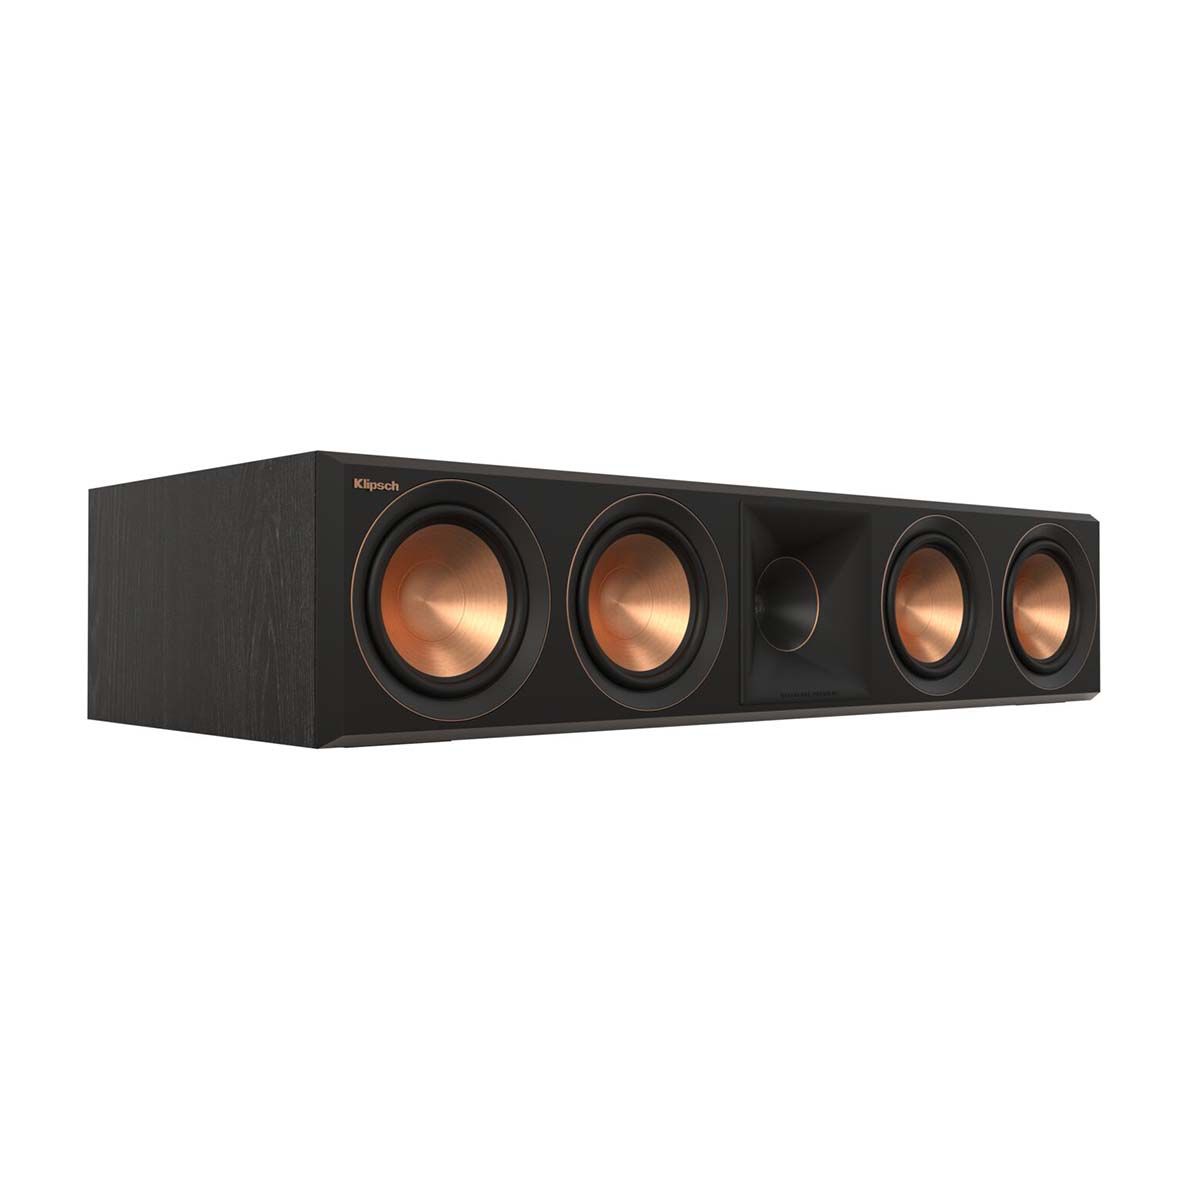 Klipsch RP-504C II Center Channel Speaker - Ebony - angled front view without grill